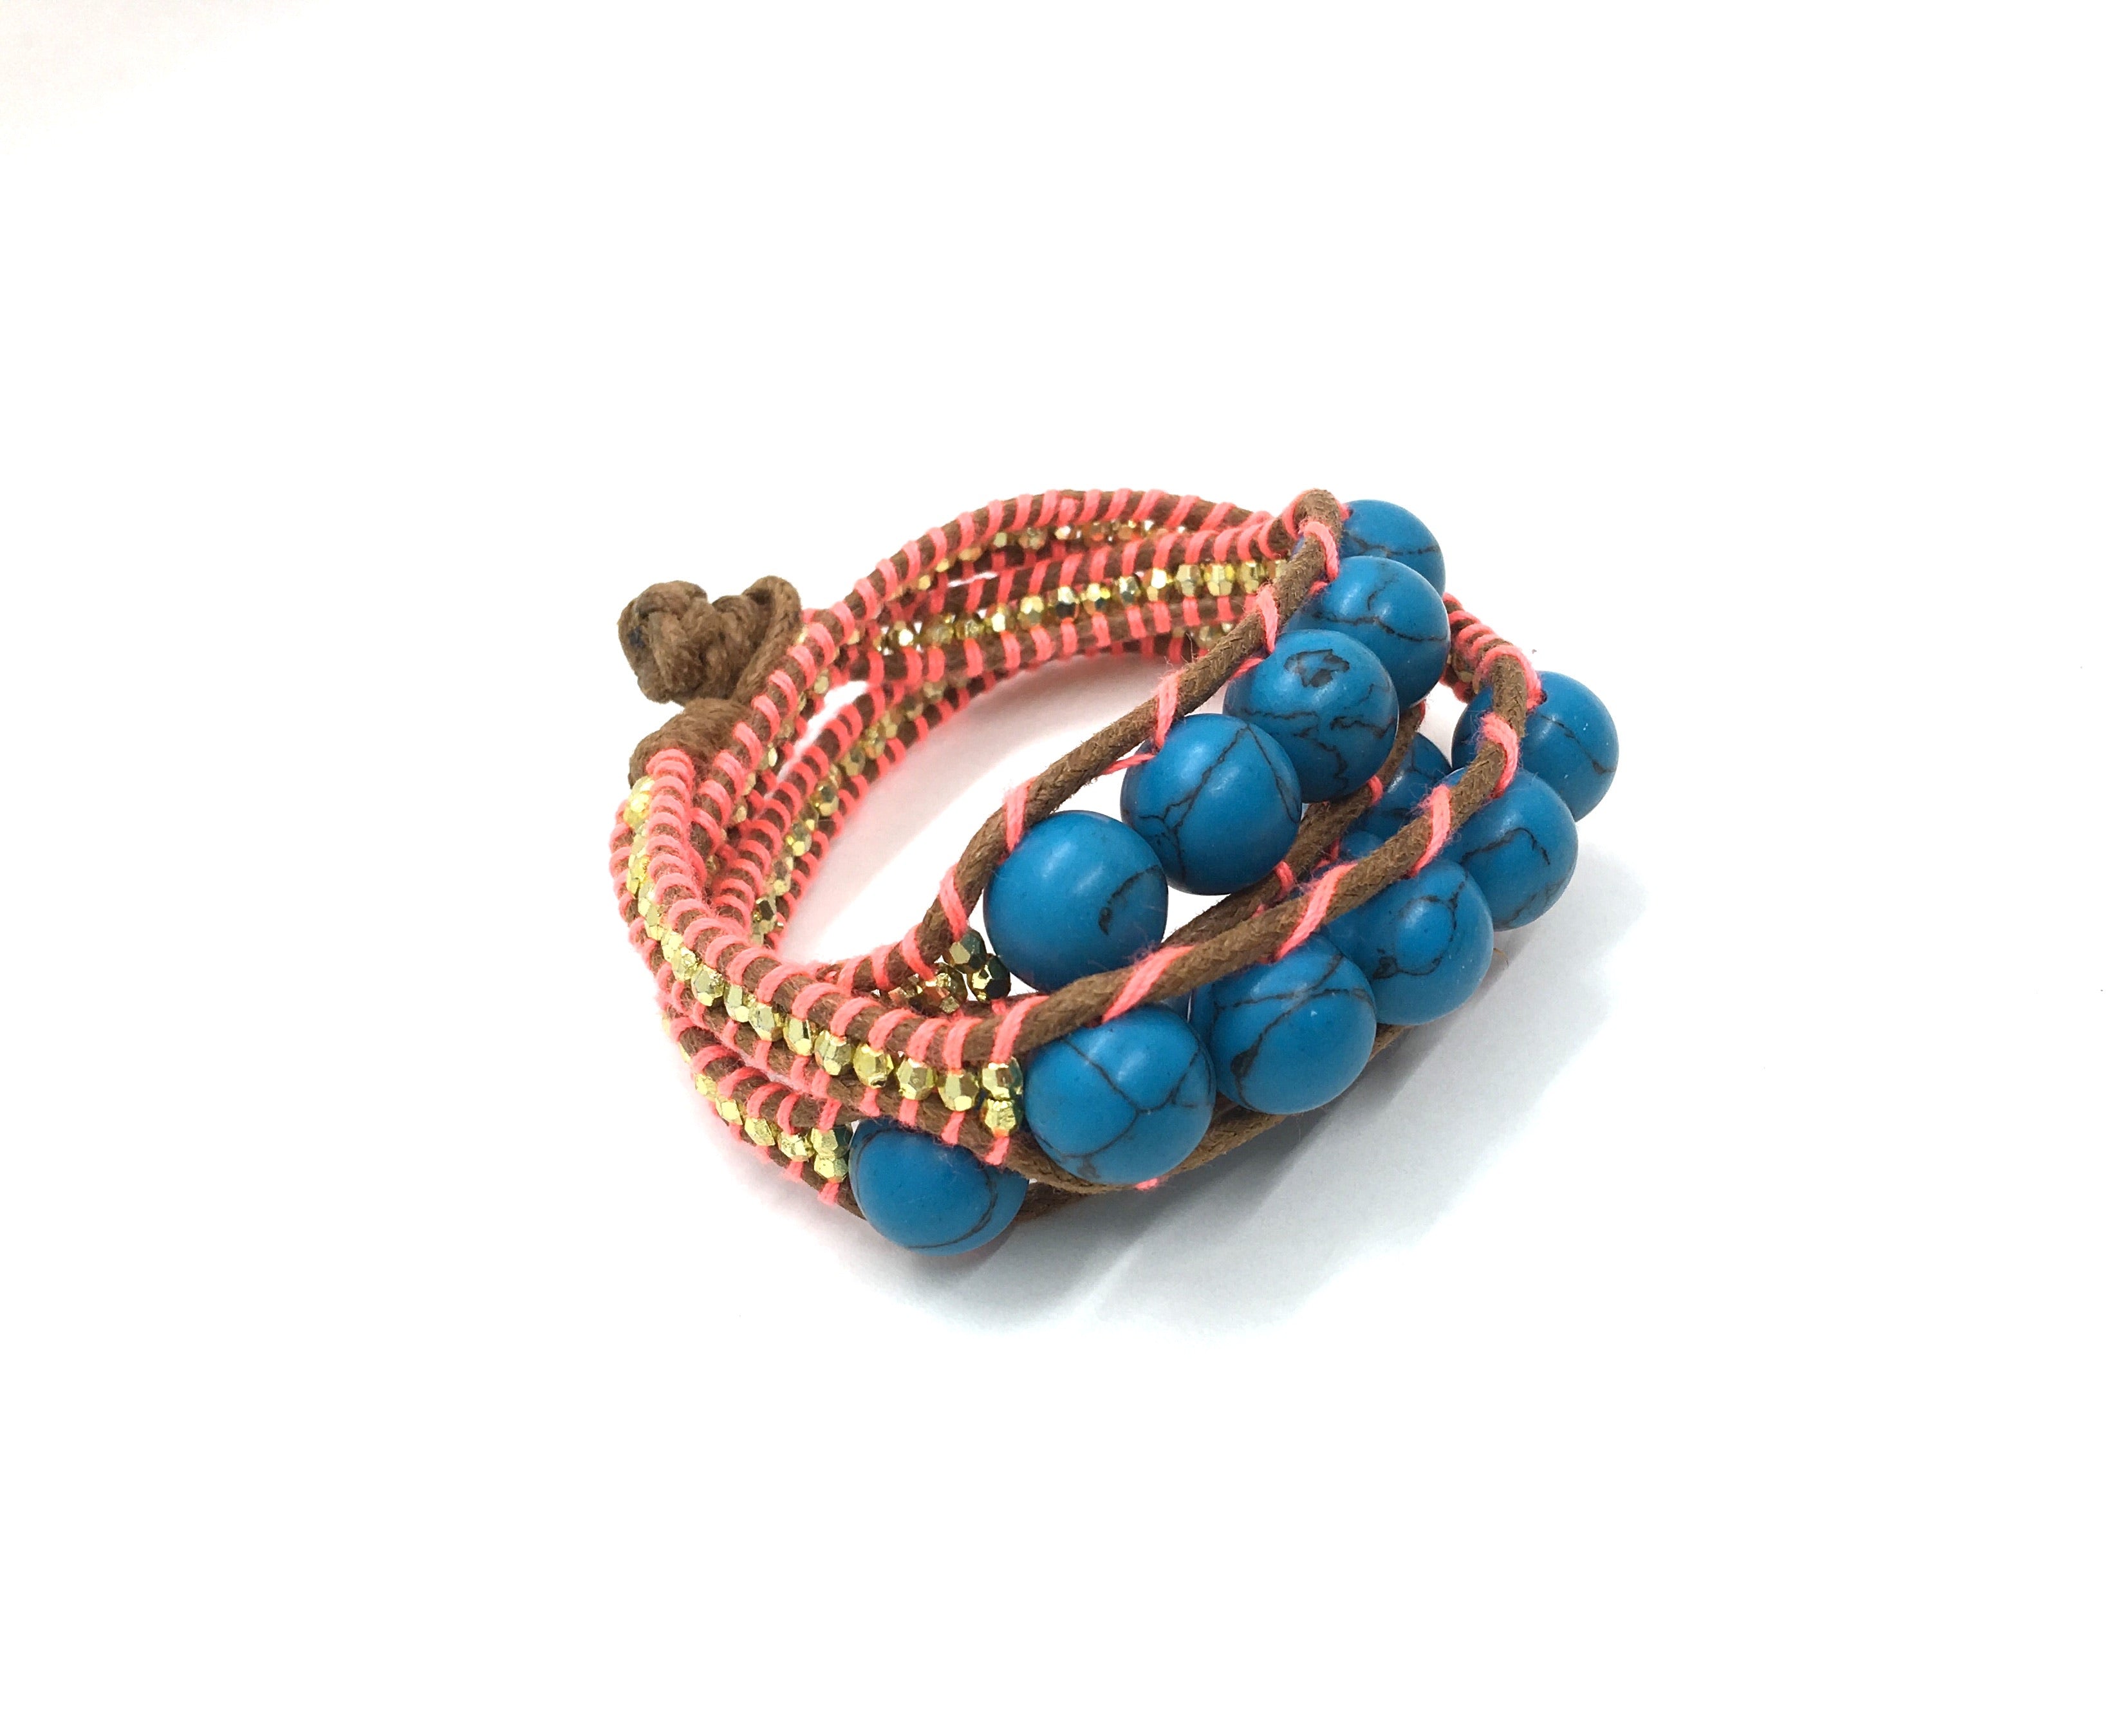 Wraparound Bracelet marbled Blue stone, gold resin side beads, brown cord fluo coral thread.